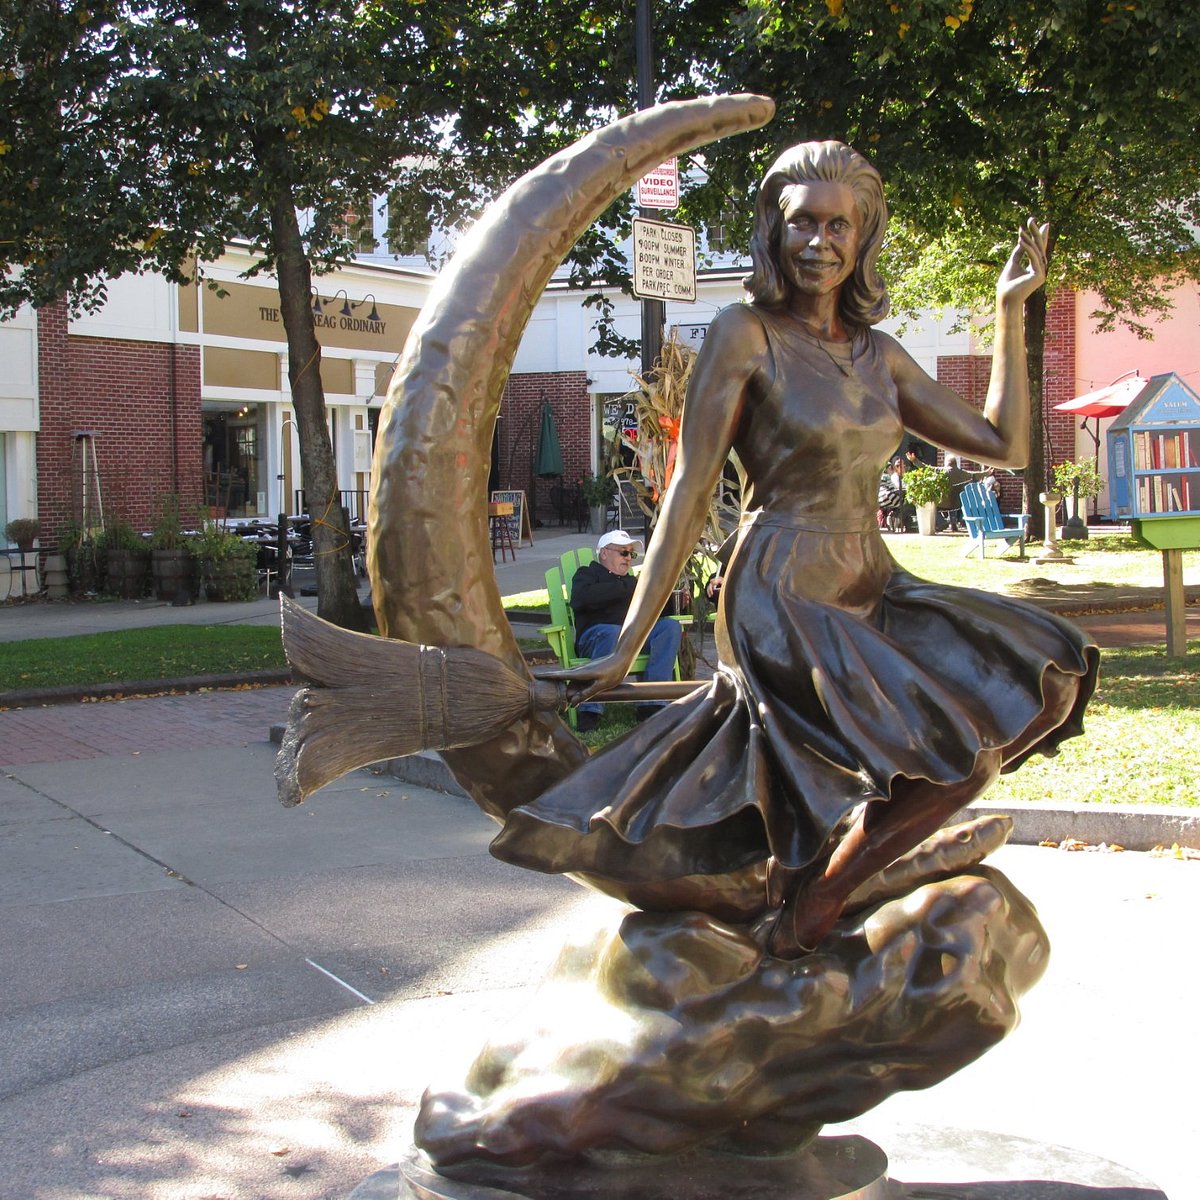 A bronze statue of a woman riding a broom in front of a crescent moon